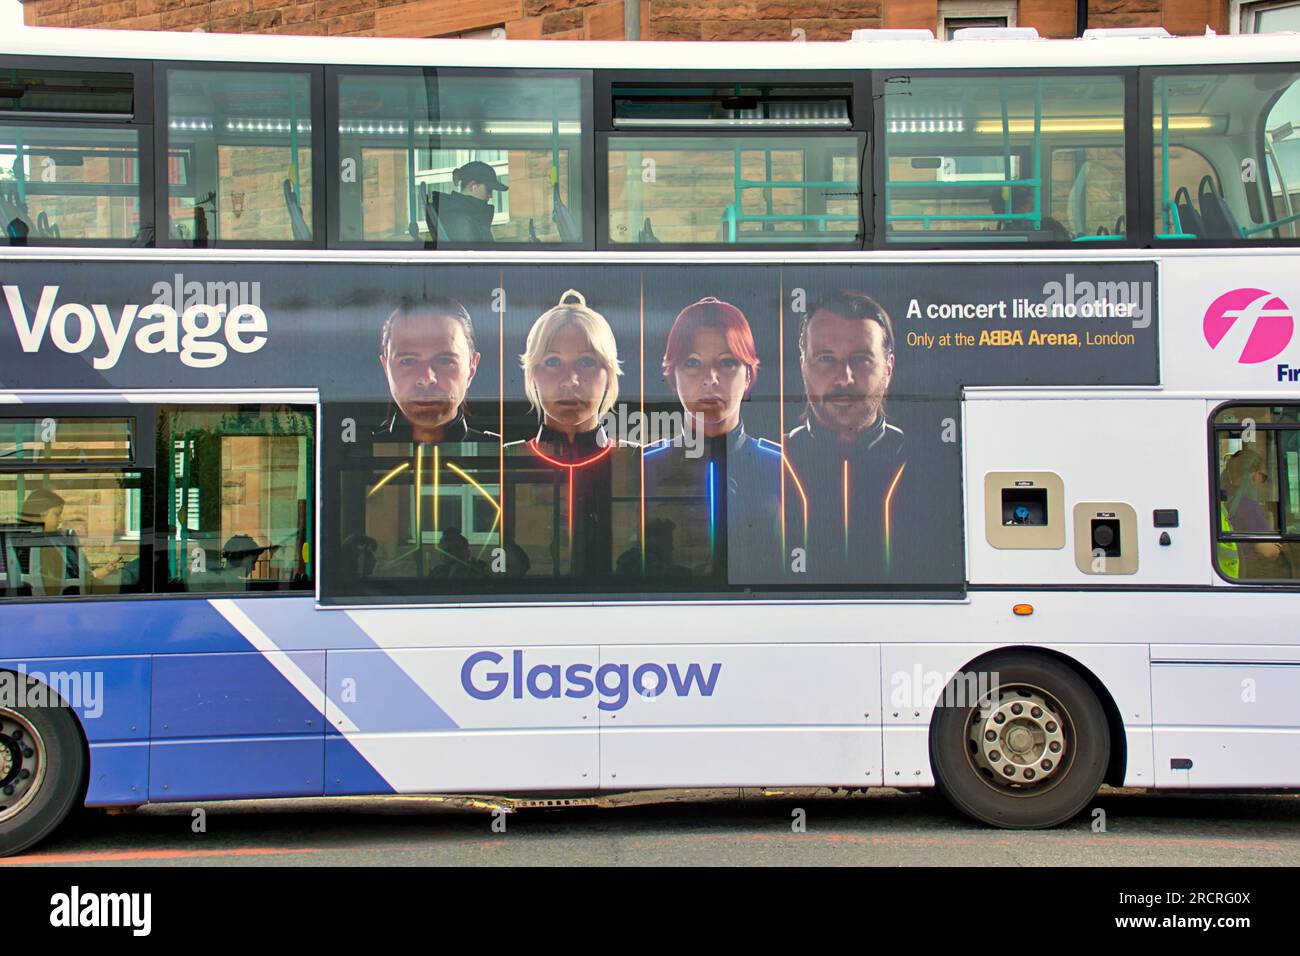 abba voyage advert on first bus in glasgow Stock Photo